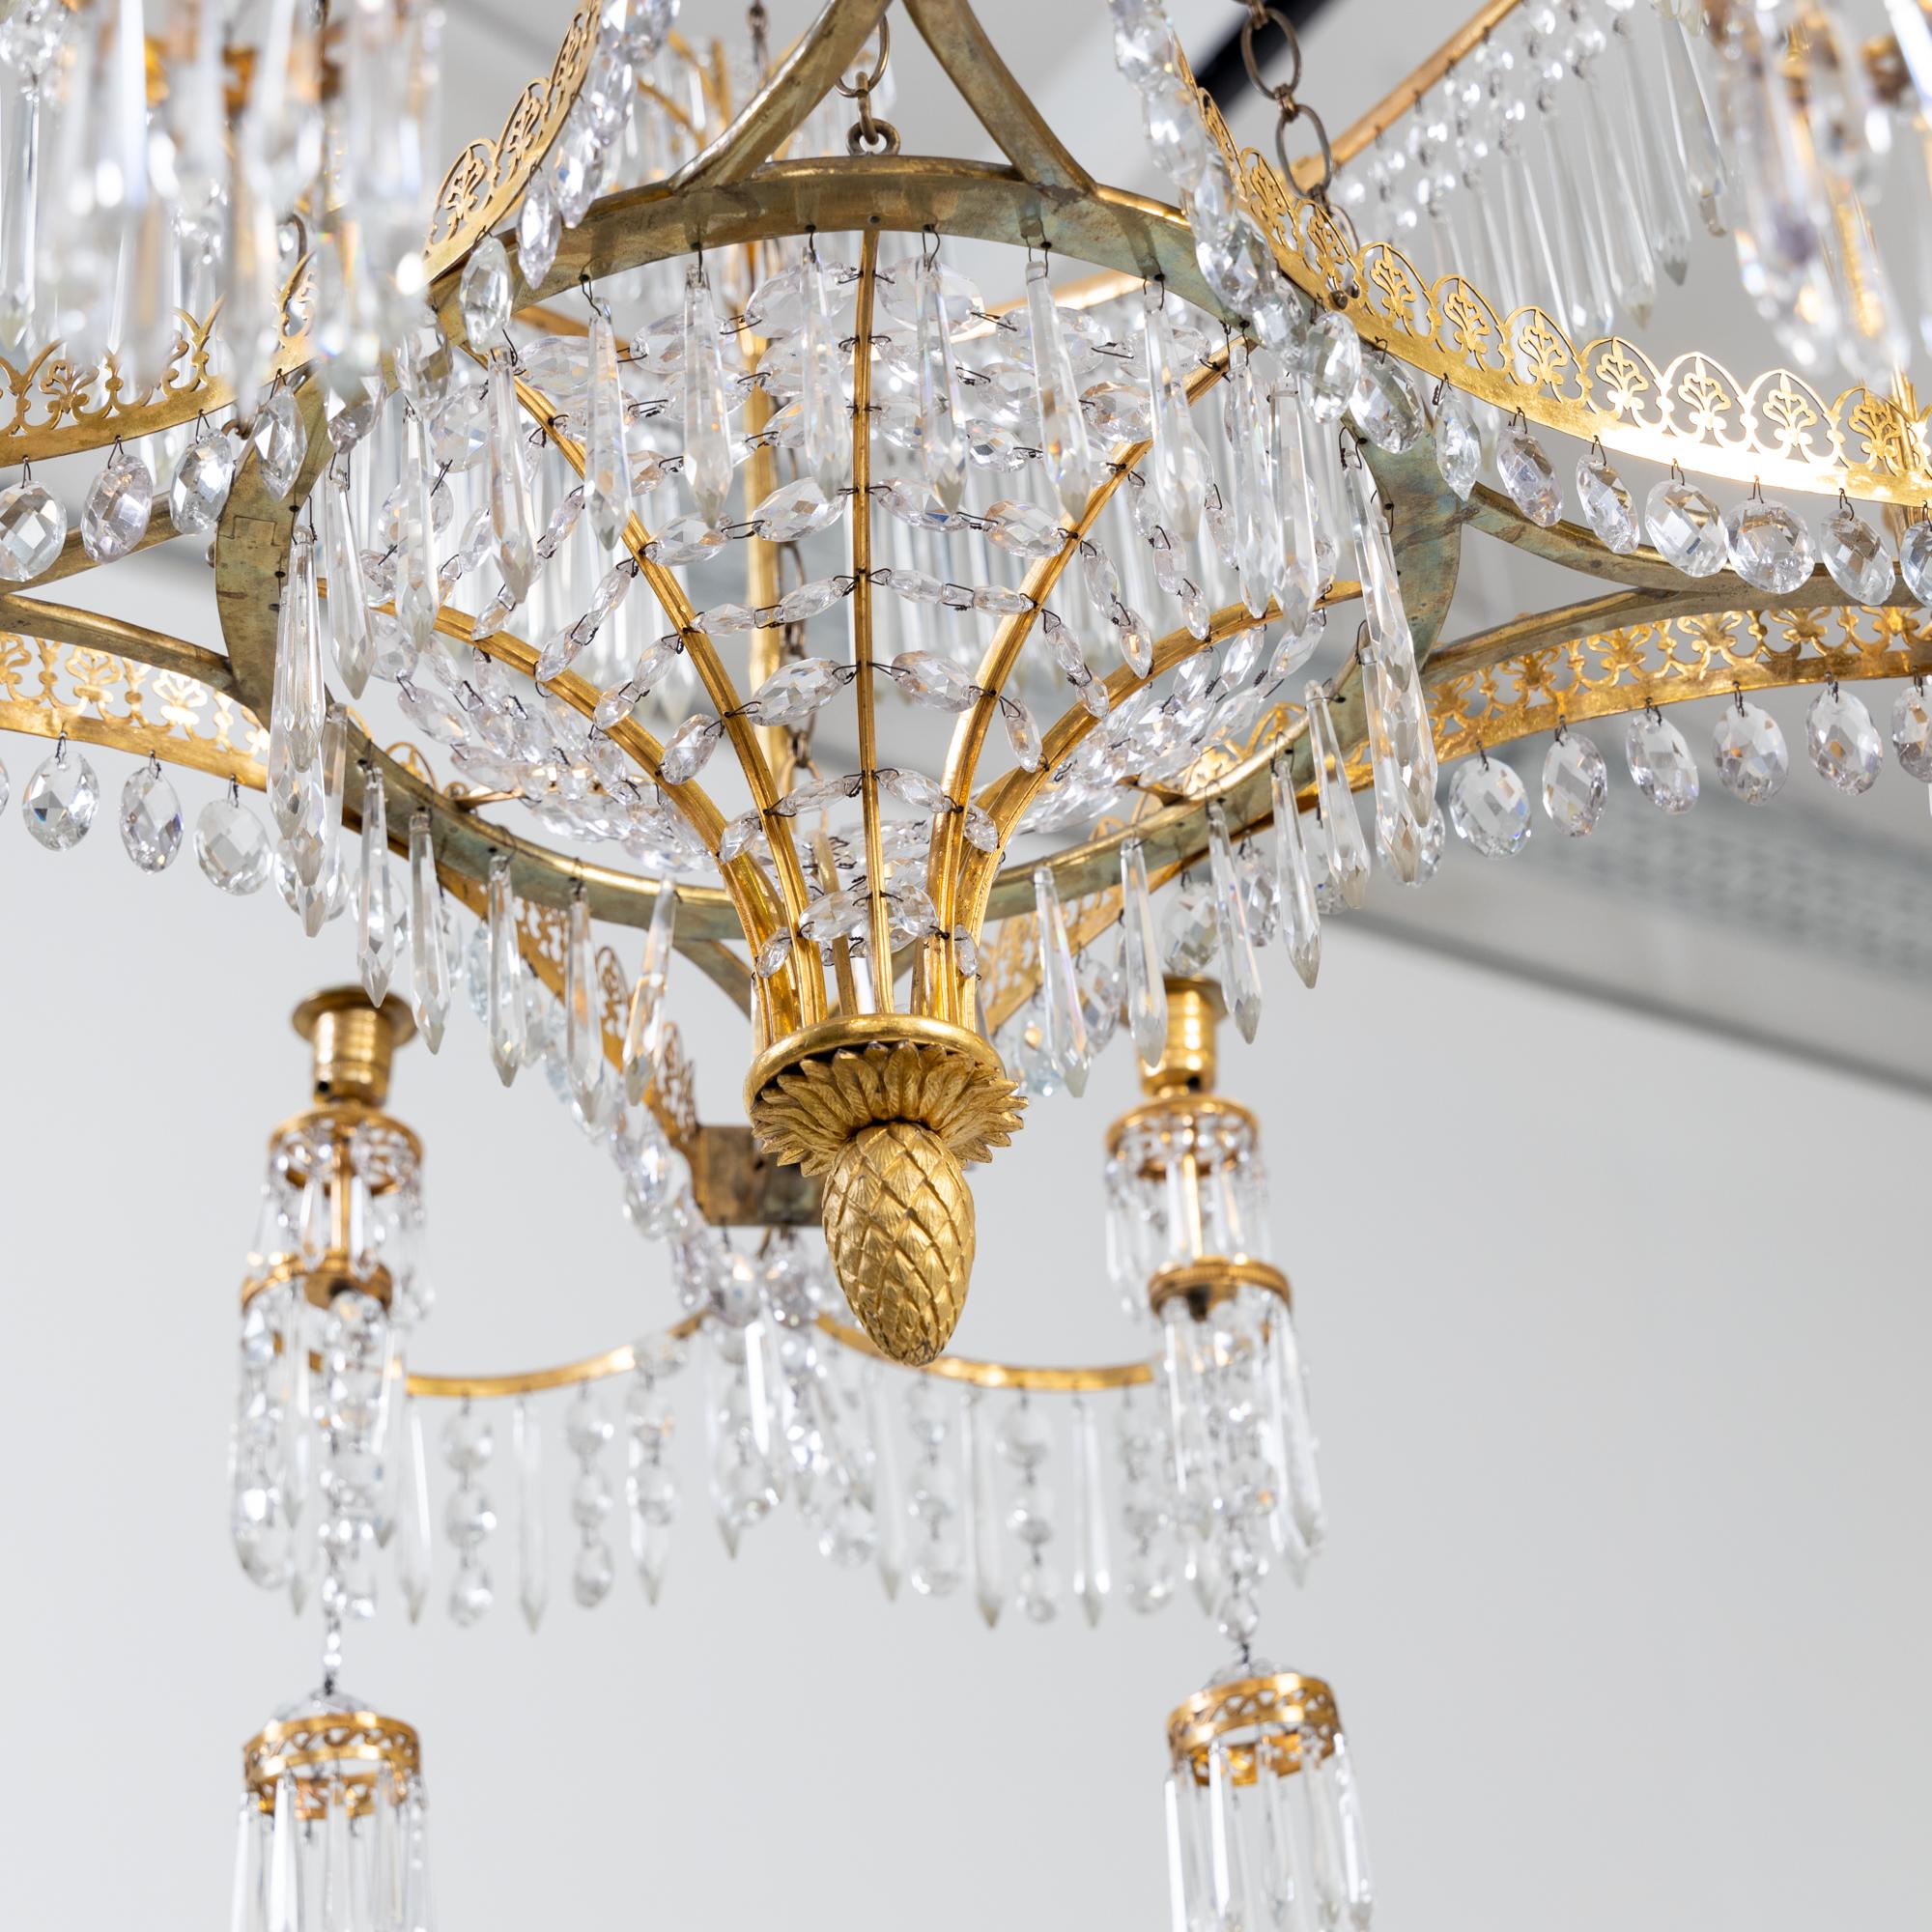 Chandelier with Palm Trees, Werner & Mieth, Berlin c. 1800-1810 For Sale 5